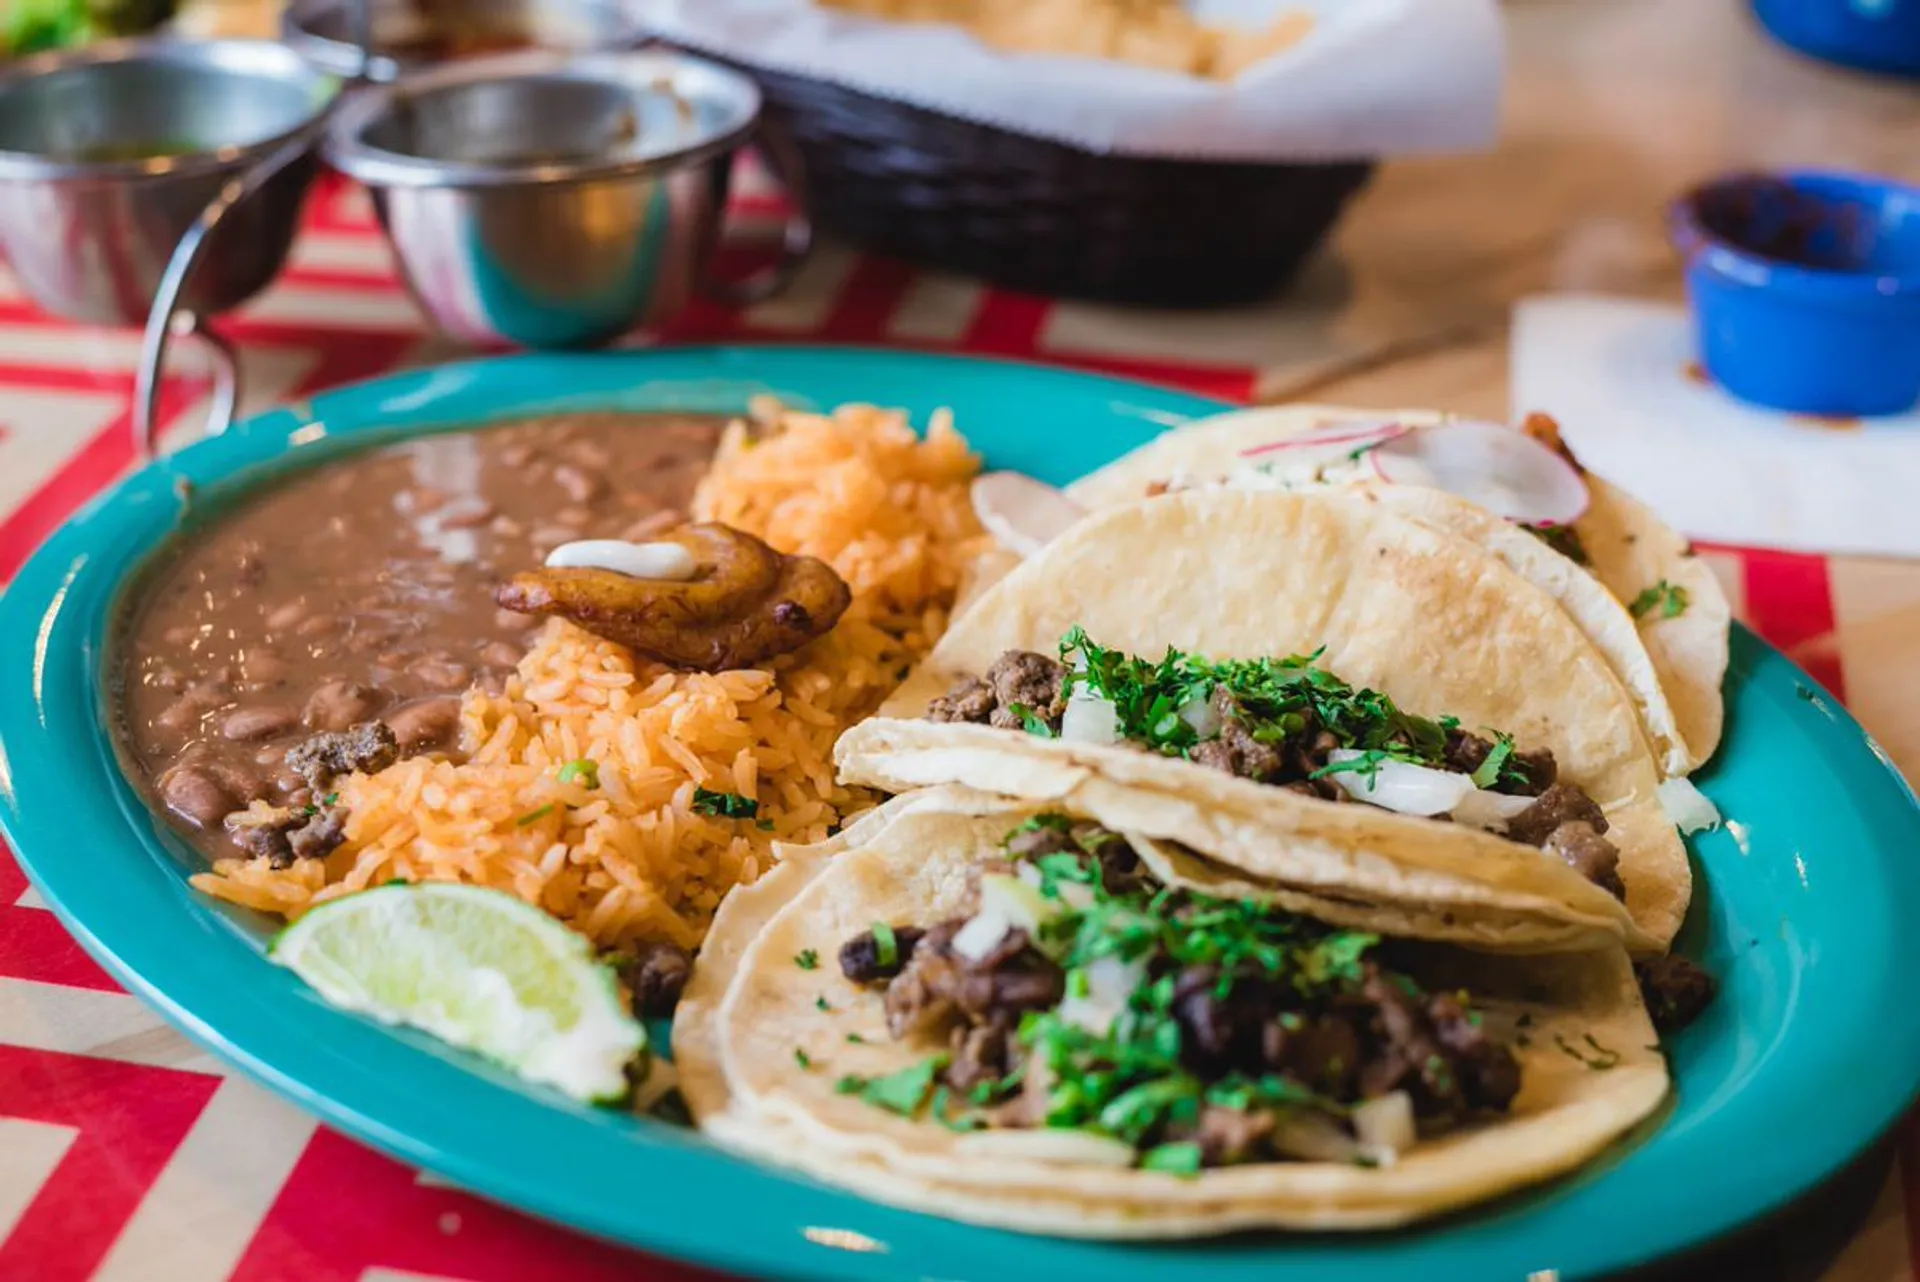 Where to get the best Cinco de Mayo deals on food and drinks